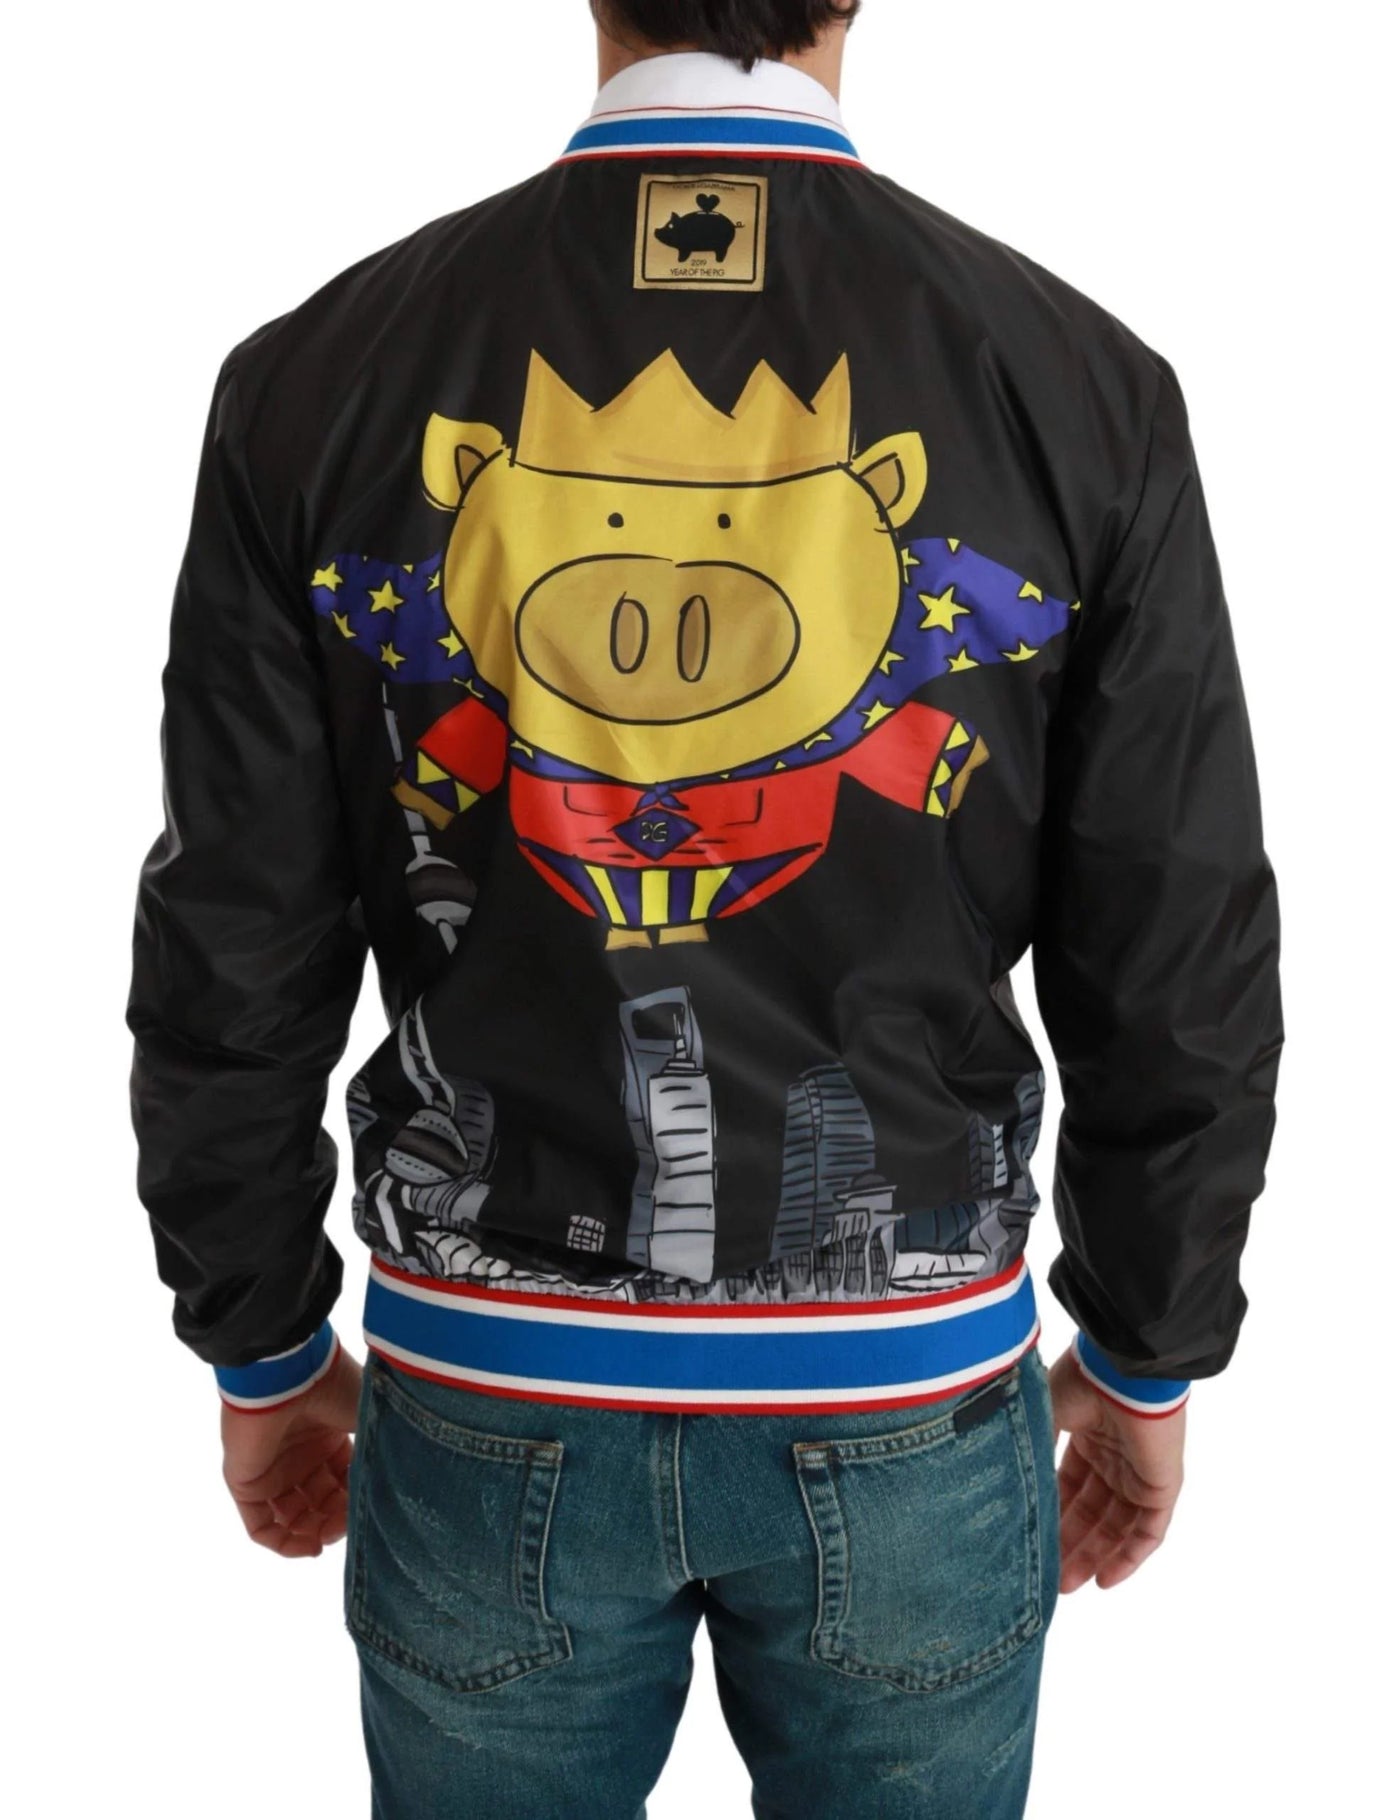 Dolce & Gabbana Black YEAR OF THE PIG Bomber Jacket #men, Black, Brand_Dolce & Gabbana, Catch, Dolce & Gabbana, feed-agegroup-adult, feed-color-black, feed-gender-male, feed-size-IT44 | XS, feed-size-IT46 | S, feed-size-IT48 | M, feed-size-IT50 | L, Gender_Men, IT44 | XS, IT46 | S, IT48 | M, IT50 | L, IT52 | L, IT54 | XL, Jackets - Men - Clothing, Kogan, Men - New Arrivals at SEYMAYKA